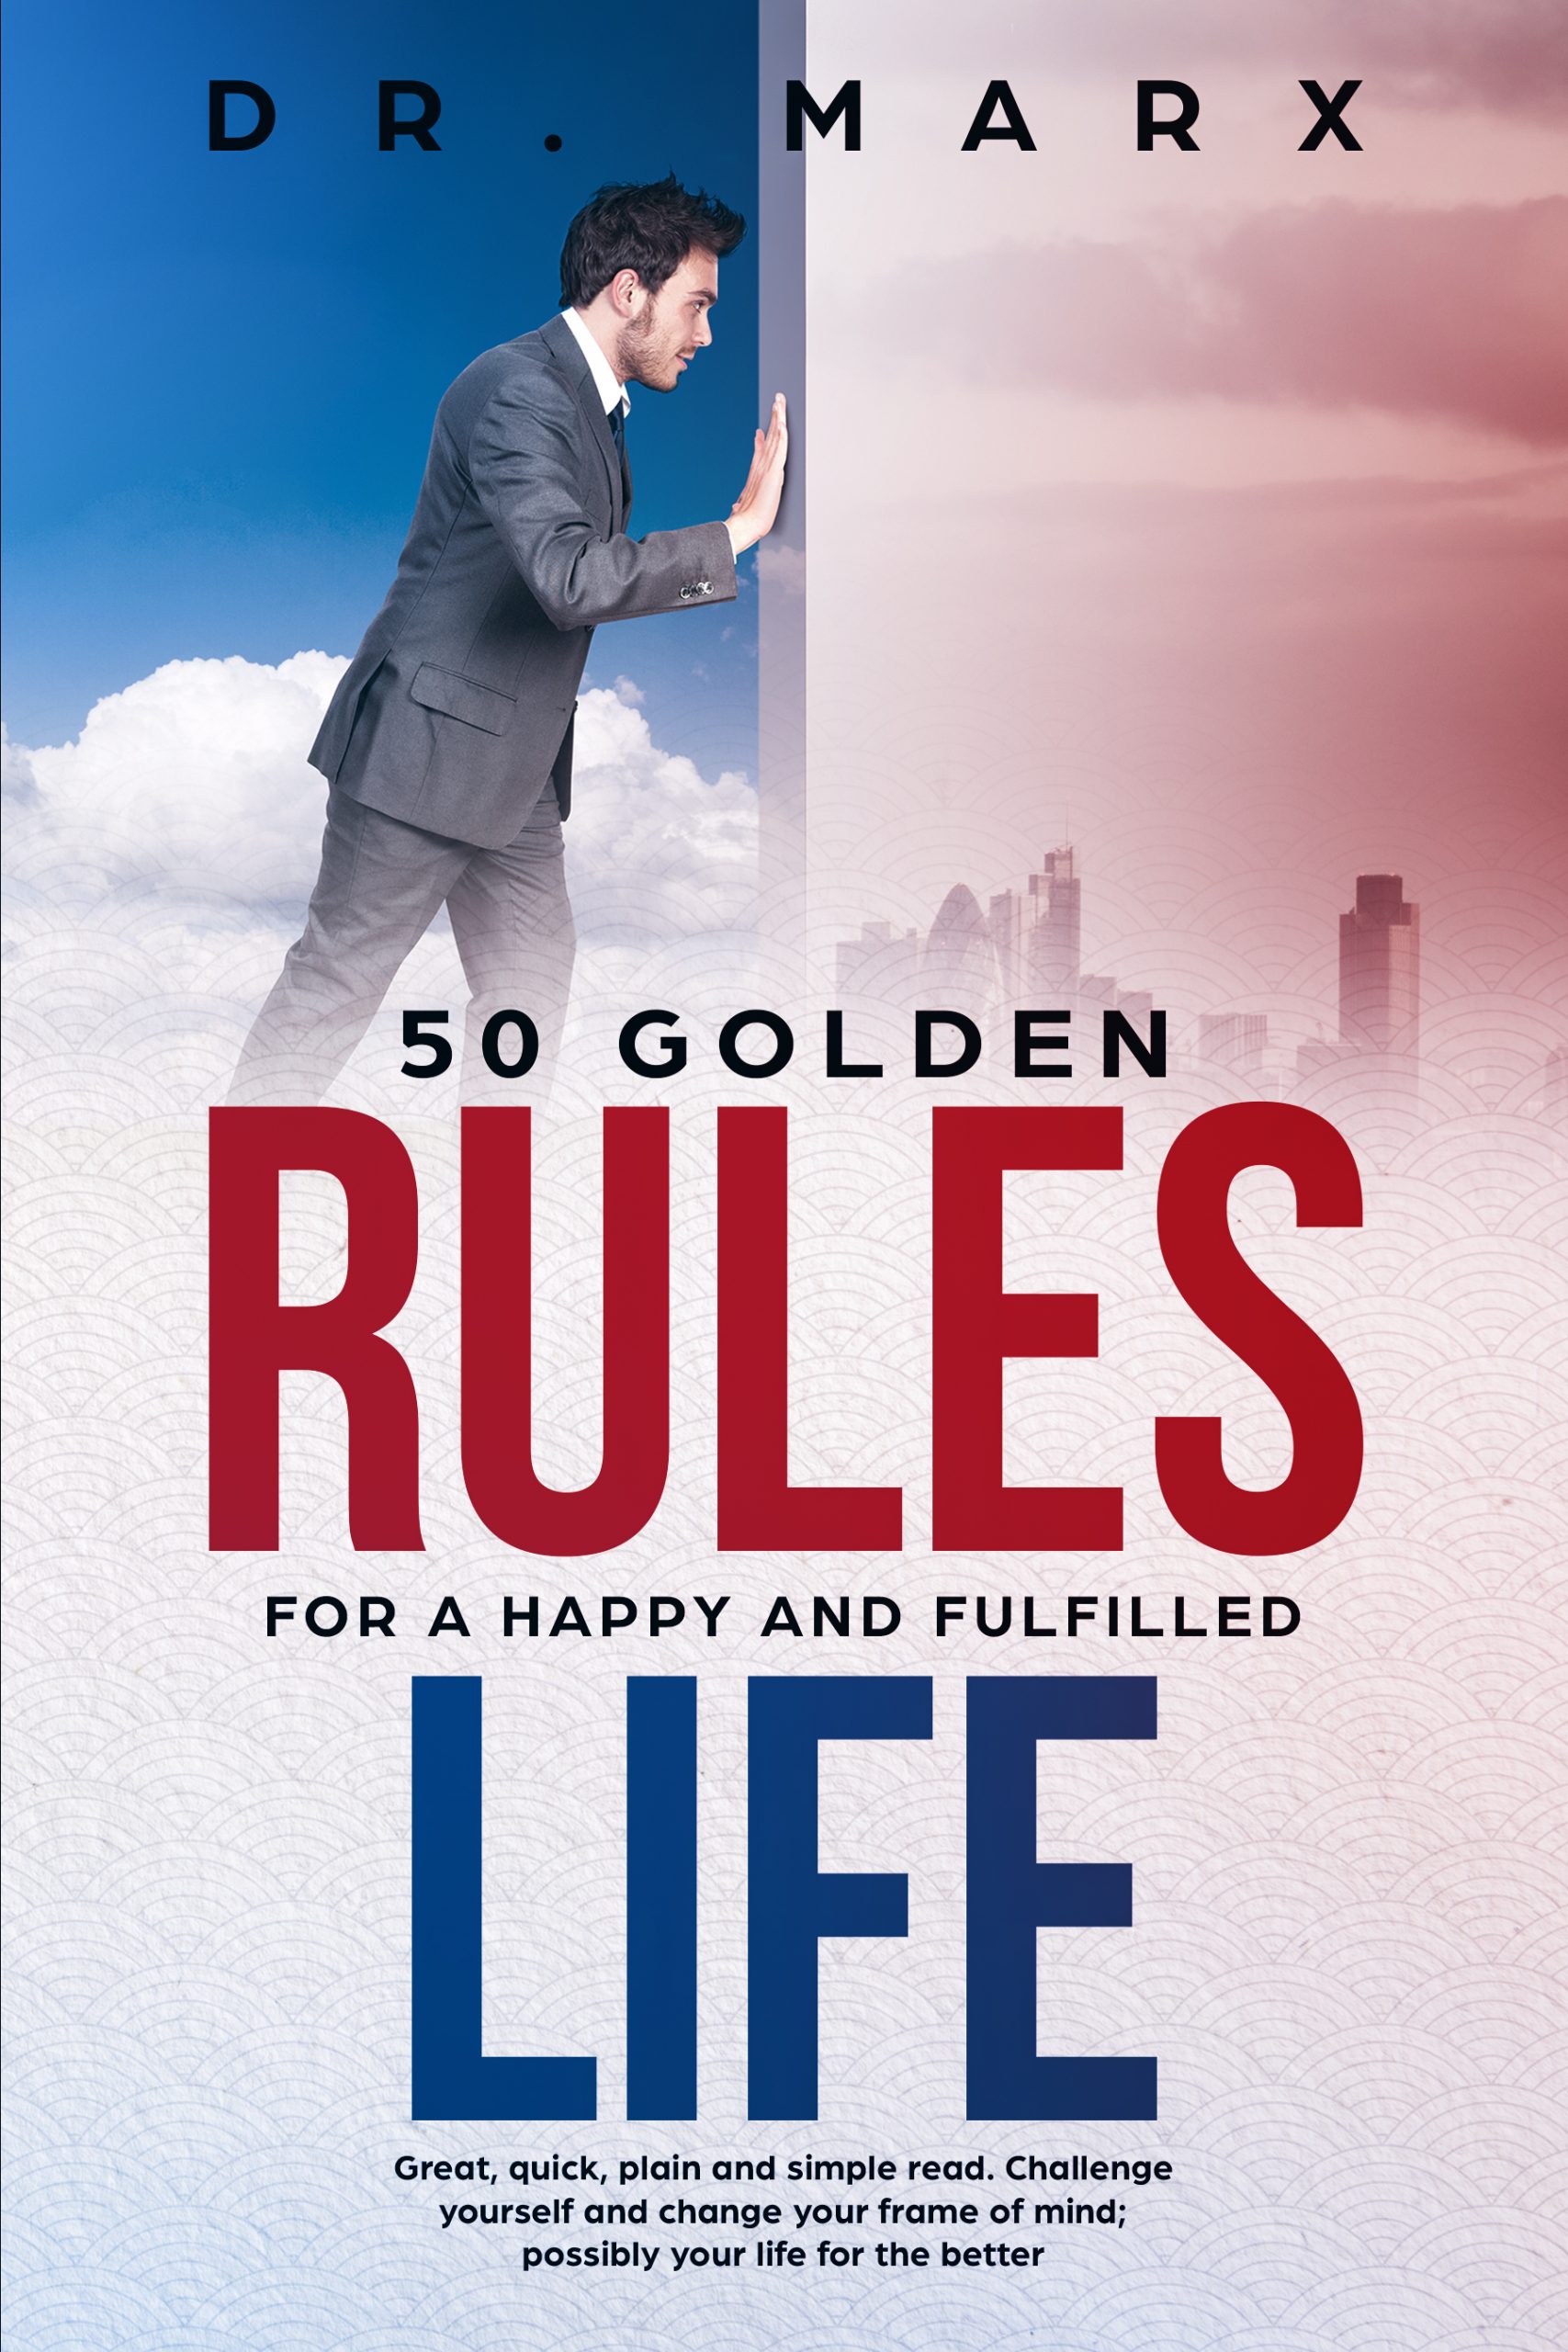 50 golden rules of life